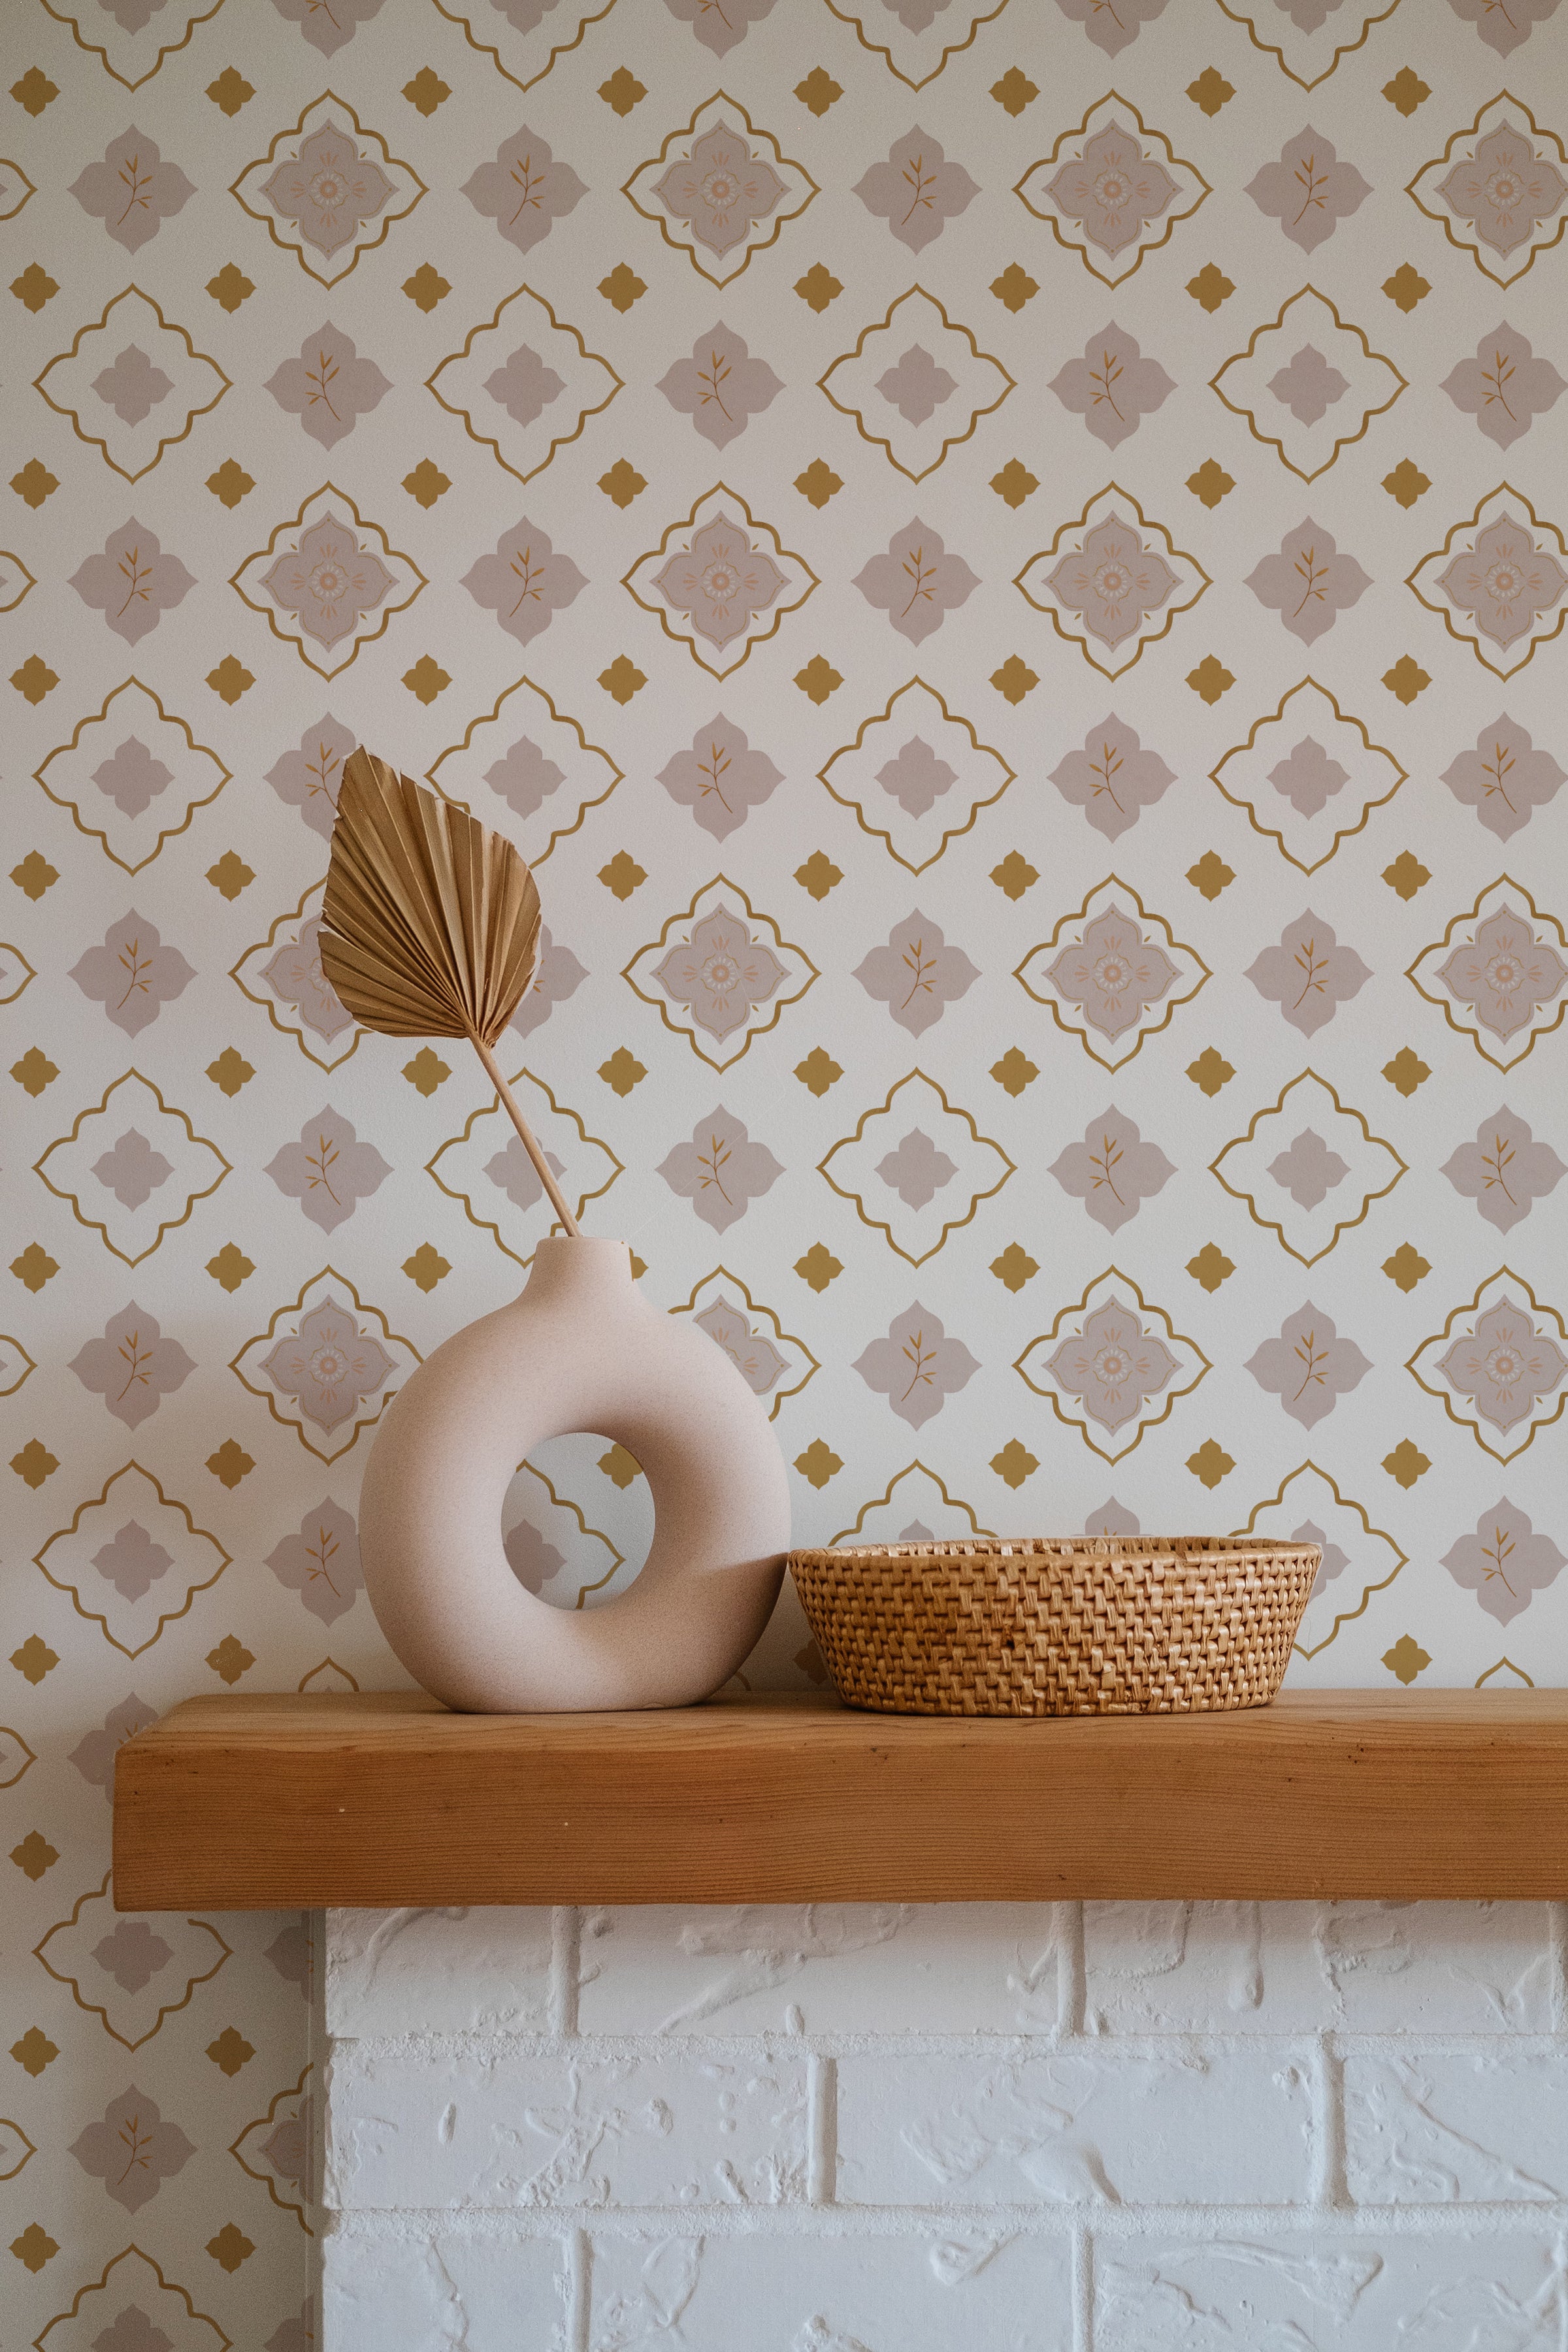 Decorative setting with Moroccan Mosaic Wallpaper in a living space, showing a wooden shelf with a ceramic vase and a woven basket against a patterned wall.